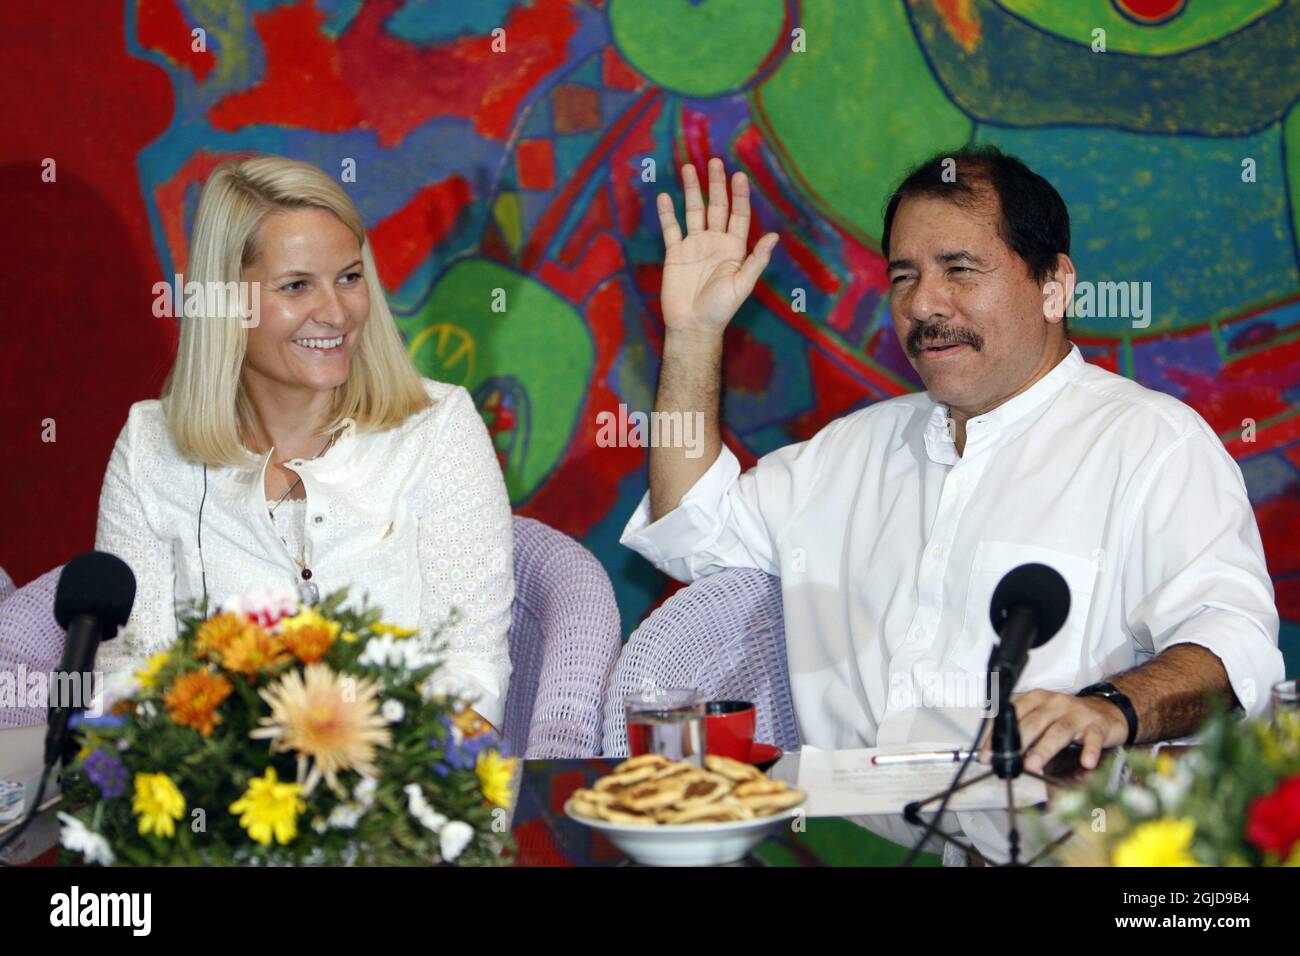 Crown Princess Mette-Marit of Norway during a visit to the President of Nicaragua Daniel Ortega and his wife   Rosario Murillo  in Managua, Nicaragua,  Stock Photo